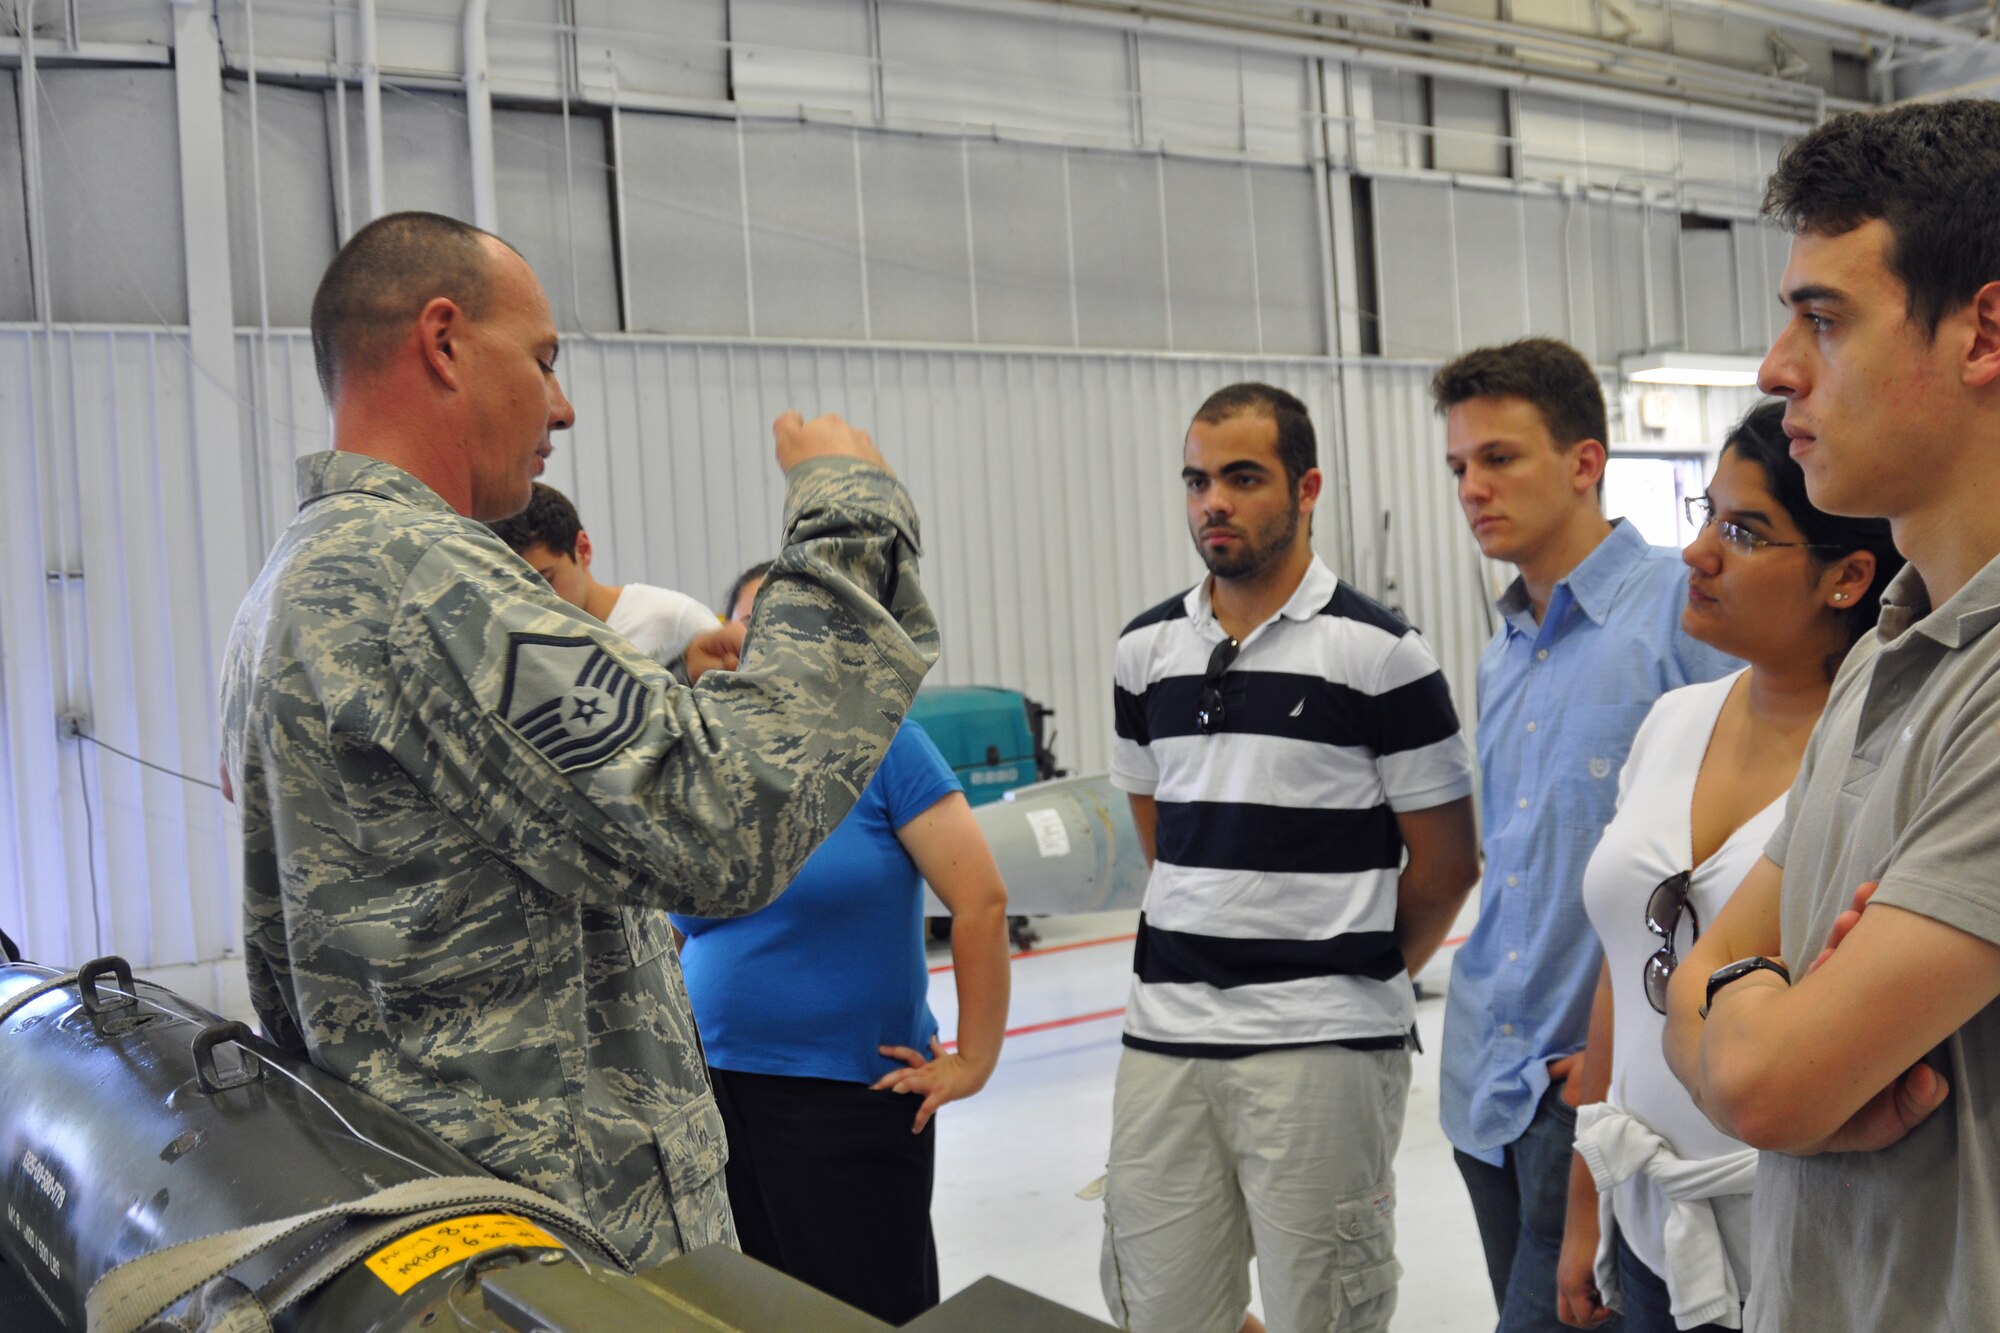 Graduate and doctoral engineering students from Brazil discuss the Joint Direct Attack Munition GBU-38 bomb with Master Sgt. Christopher Rasco, a load standardization team chief assigned to the 355th Maintenance Operations Squadron, at Davis-Monthan Air Force Base, July 24. The students were in Tucson, Ariz., visiting the nearby Raytheon Company as part of Brazil’s Science Without Borders program and requested the opportunity to visit D-M.  The GBU-38 is the smallest version of the JDAM weighing in at approximately 500 pounds. (U.S. Air Force photo/Capt. Jonathan Simmons)